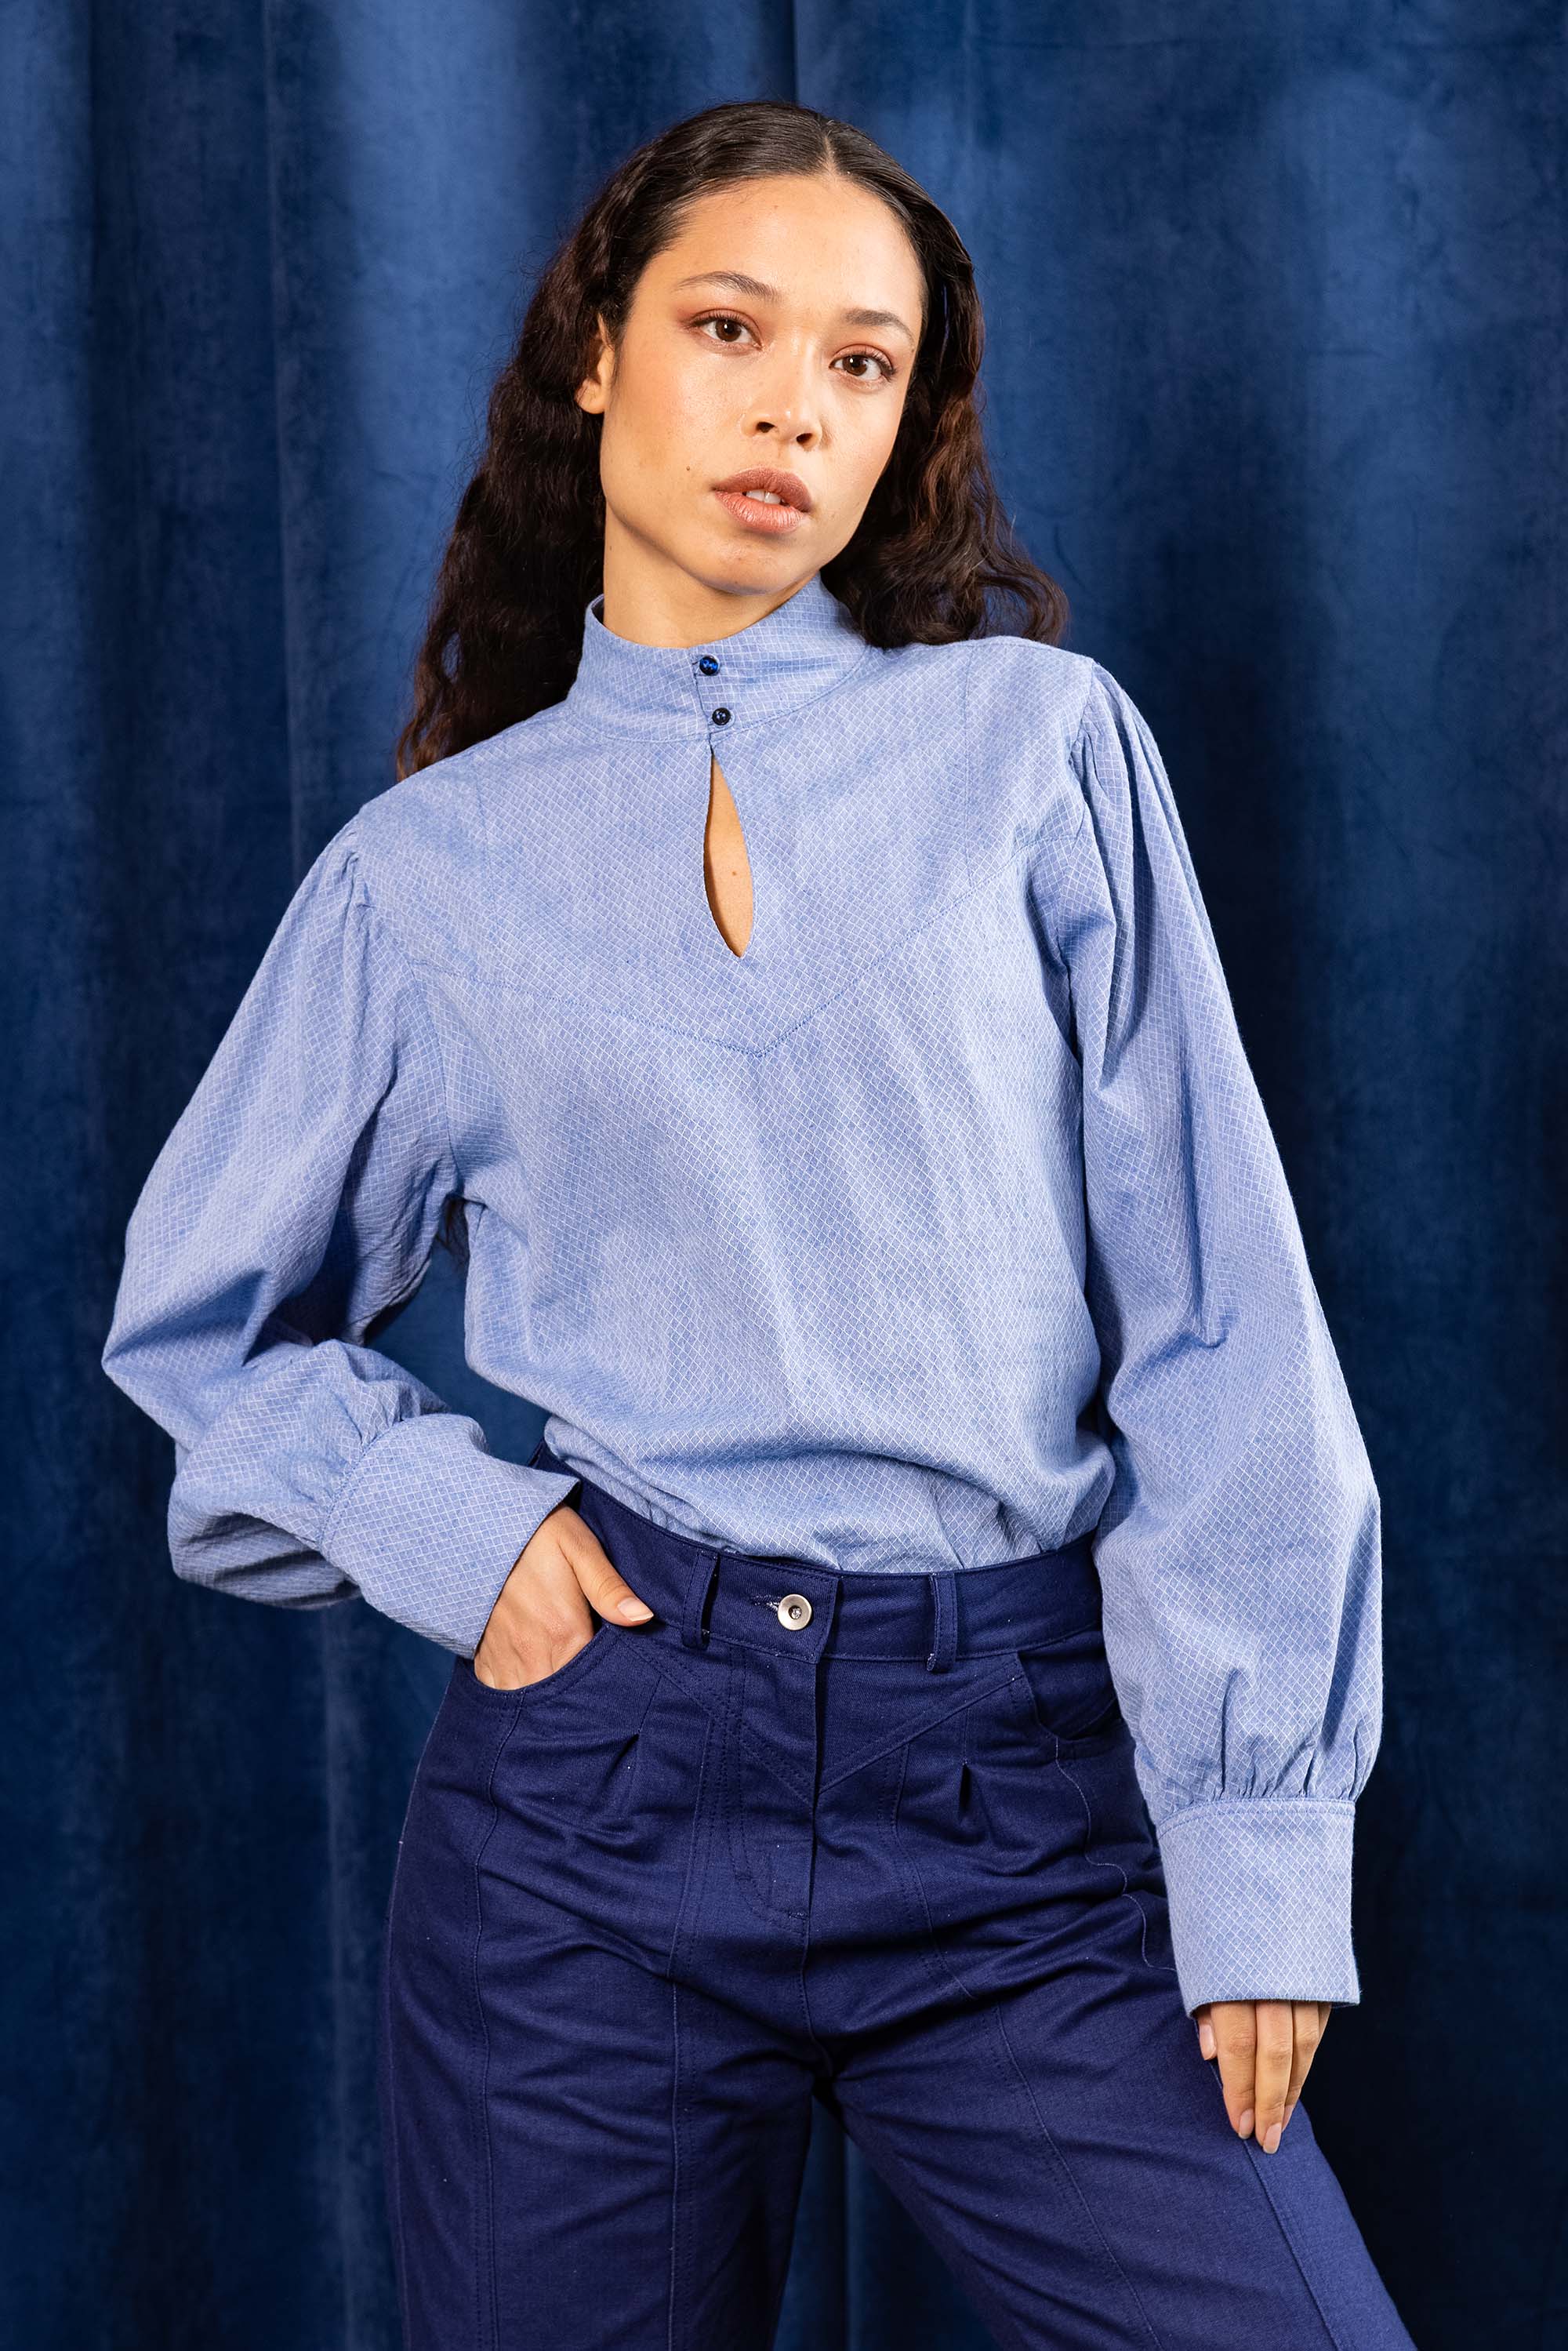 sophisticated blue high collar buttoned shirt for women novelty new winter collection 2022 misericordia